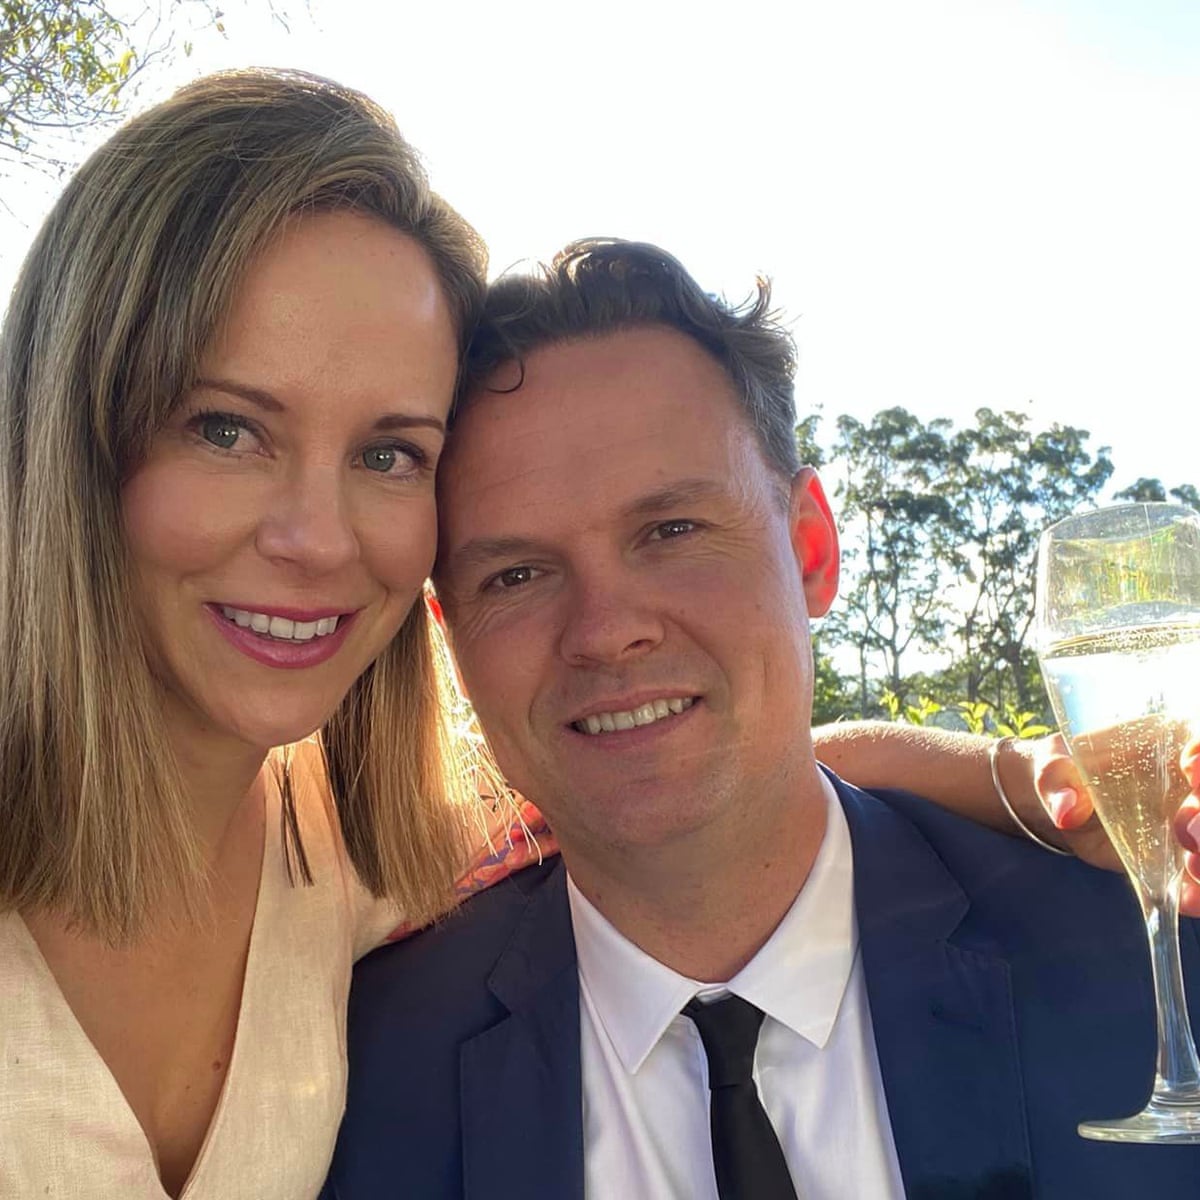 Marry My Husband Chap 45 The moment I knew: I learned he had a new girlfriend and flew across the  world to win him back | Australian lifestyle | The Guardian